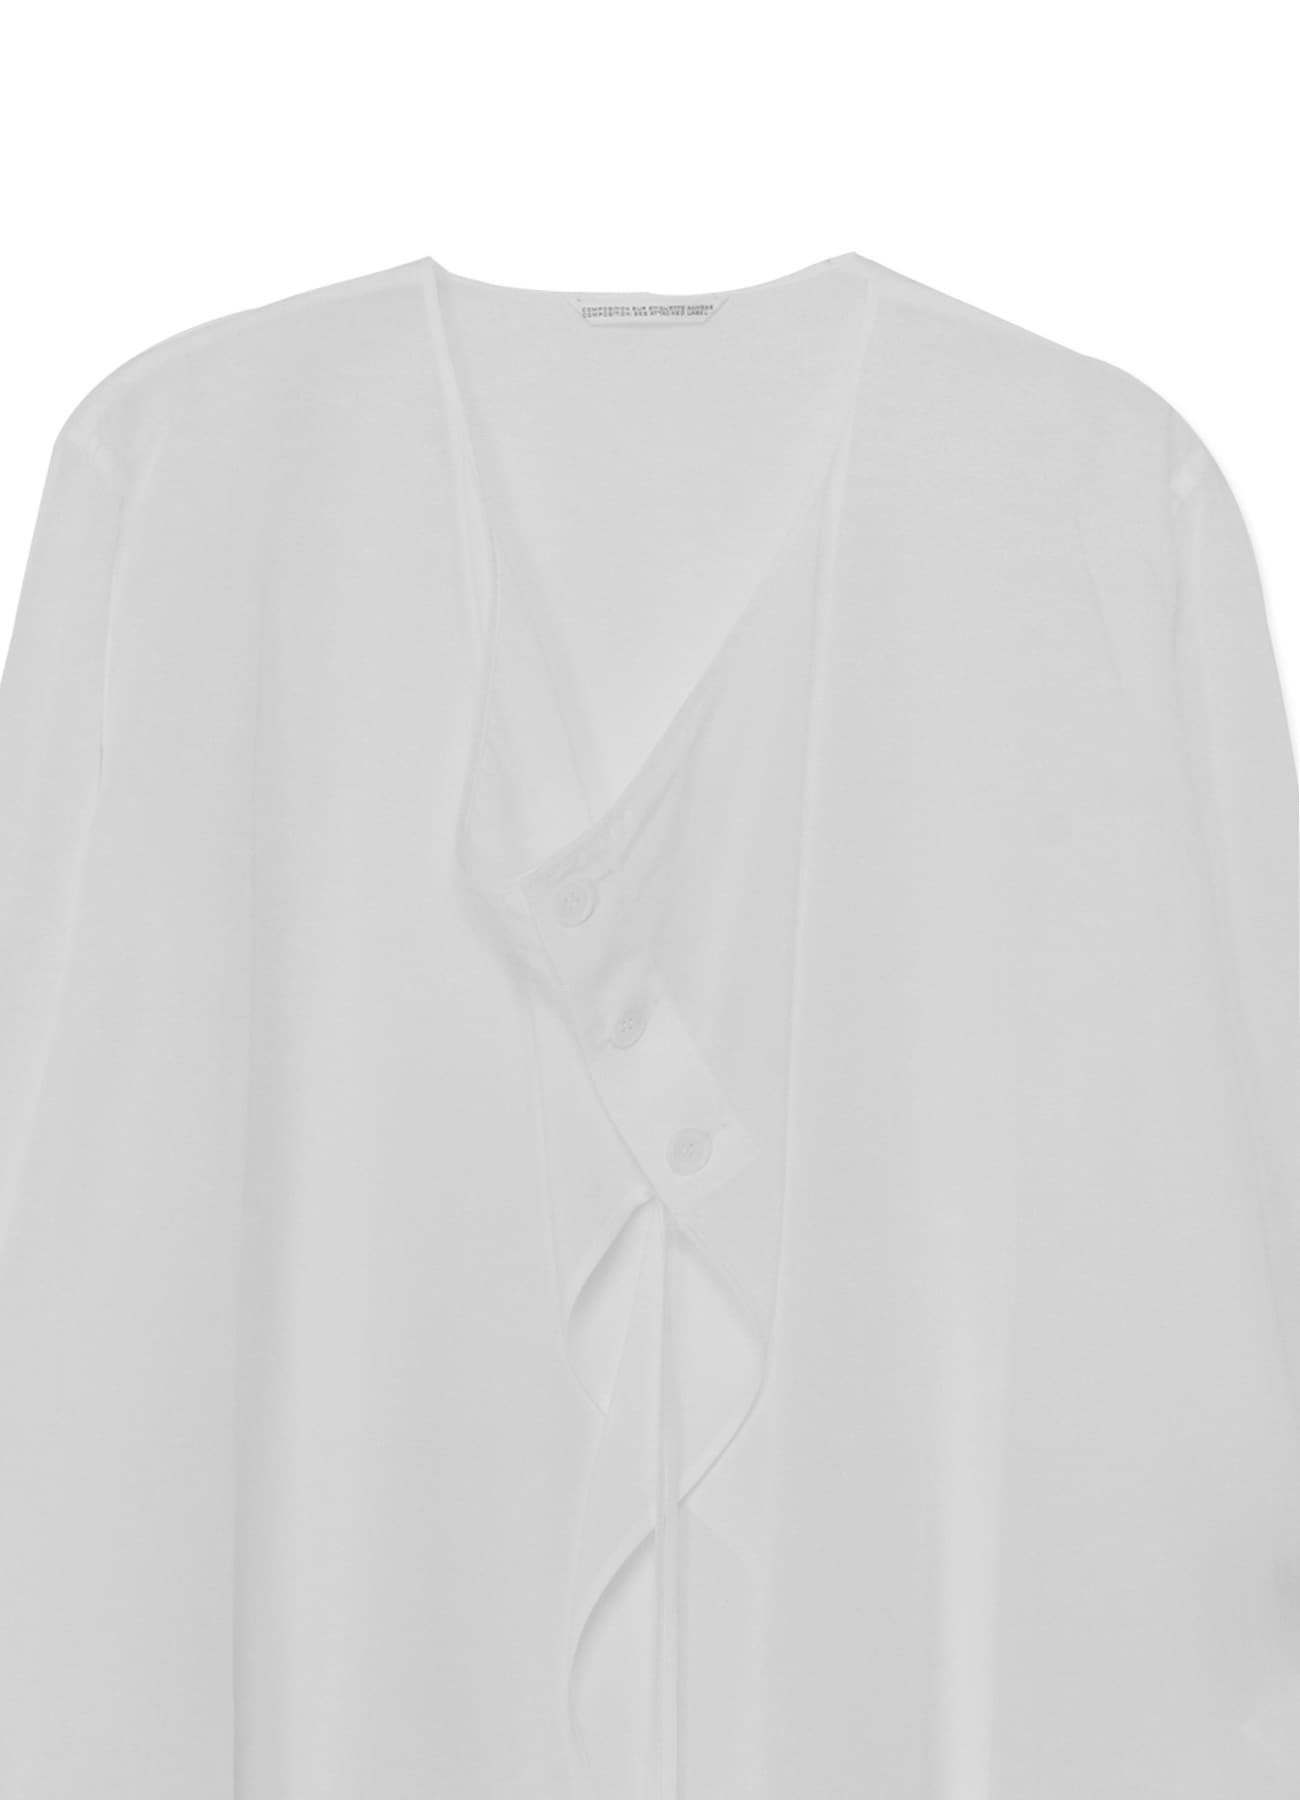 BLOUSE WITH FRONT SLIT	